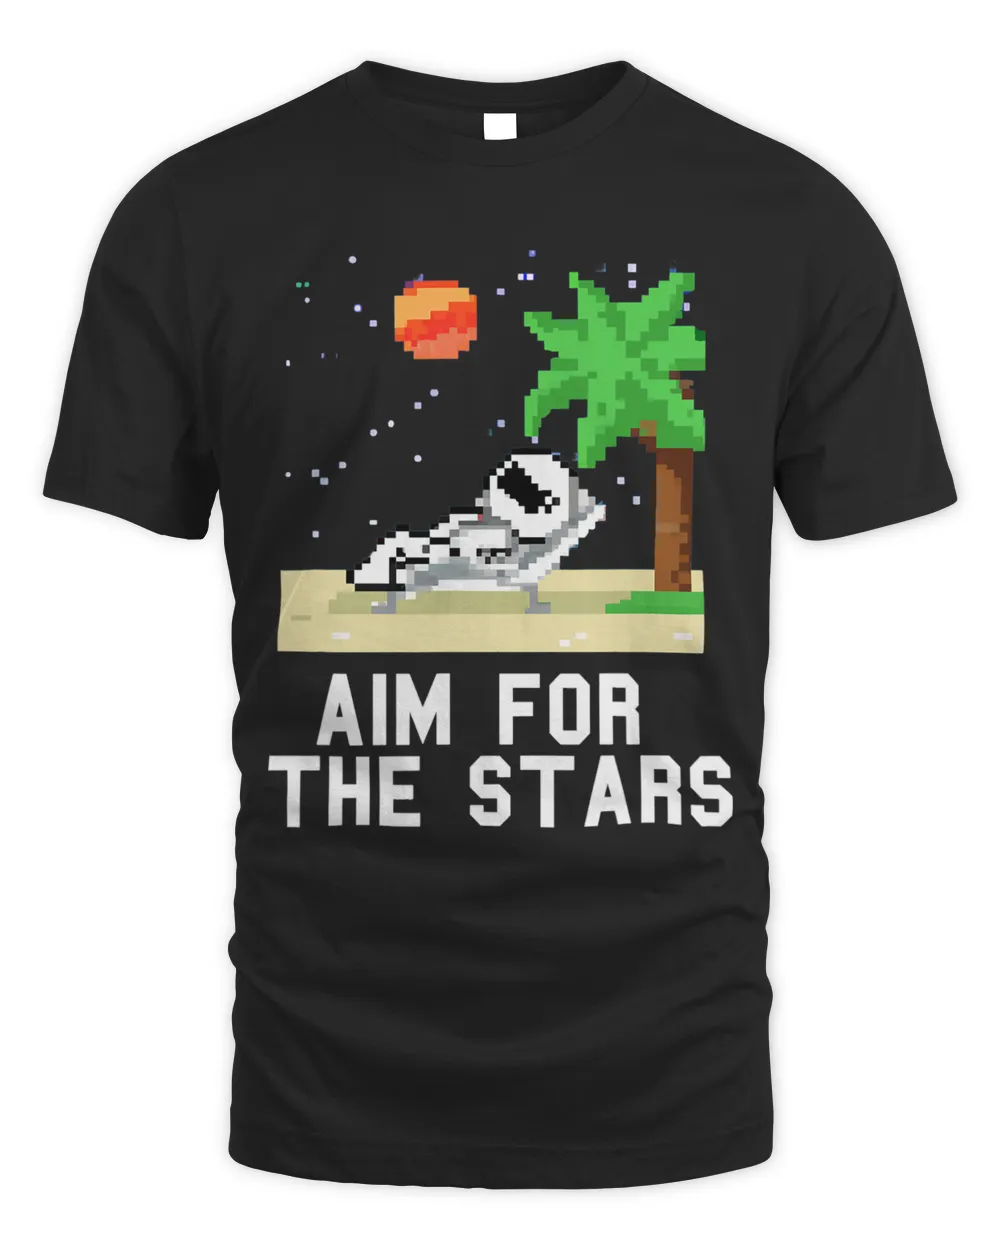 AIM FOR THE STARS ASTRONAUT LOUNGING PIXELATED ART